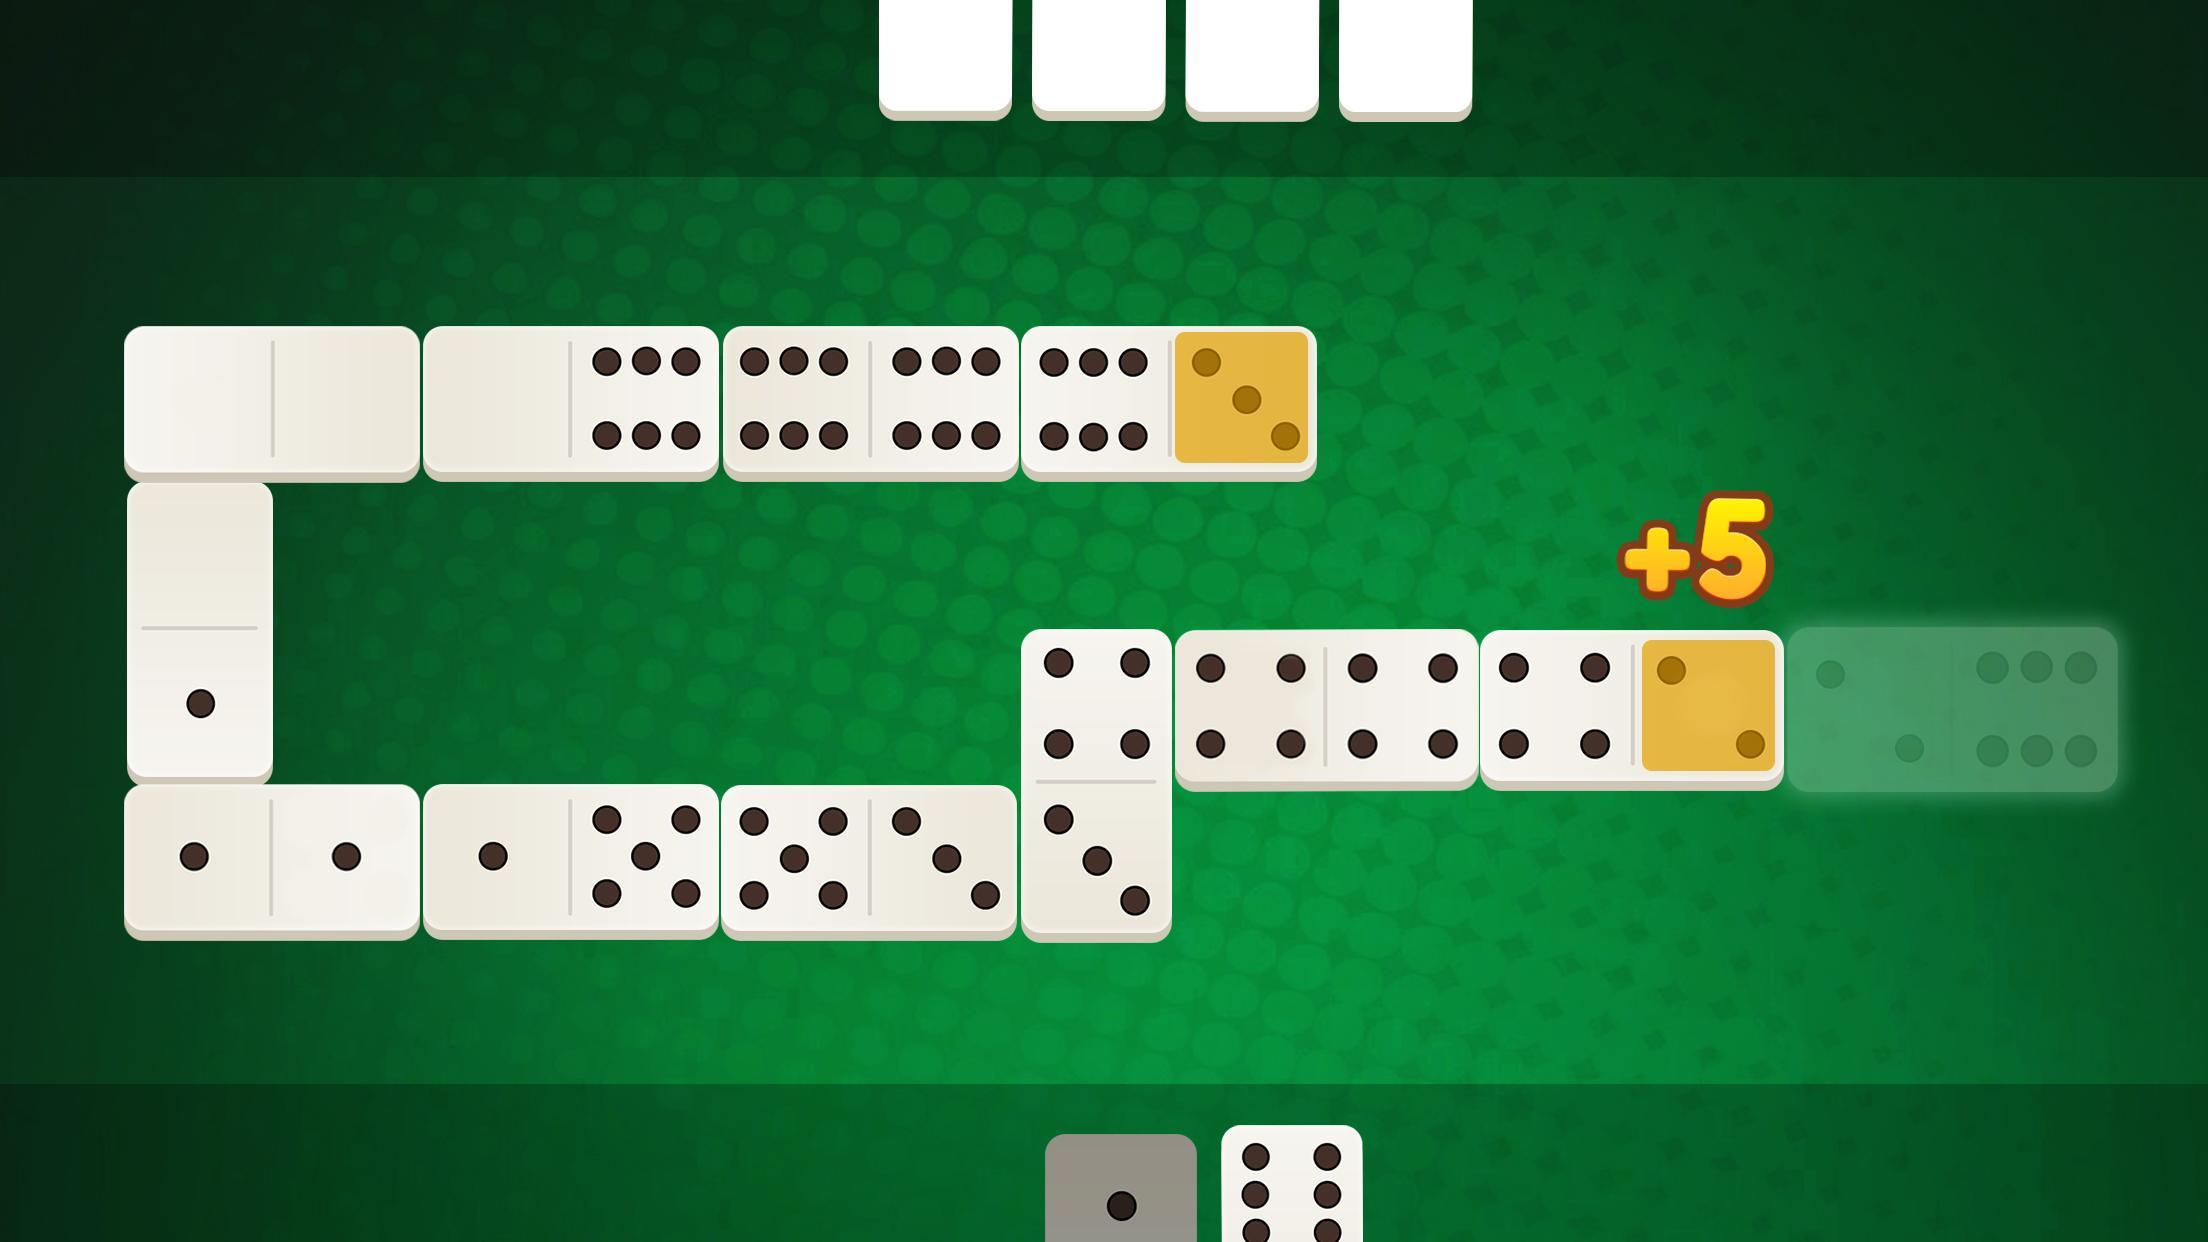 Dominos Party - Classic Domino Board Game 4.9.4 Screenshot 24